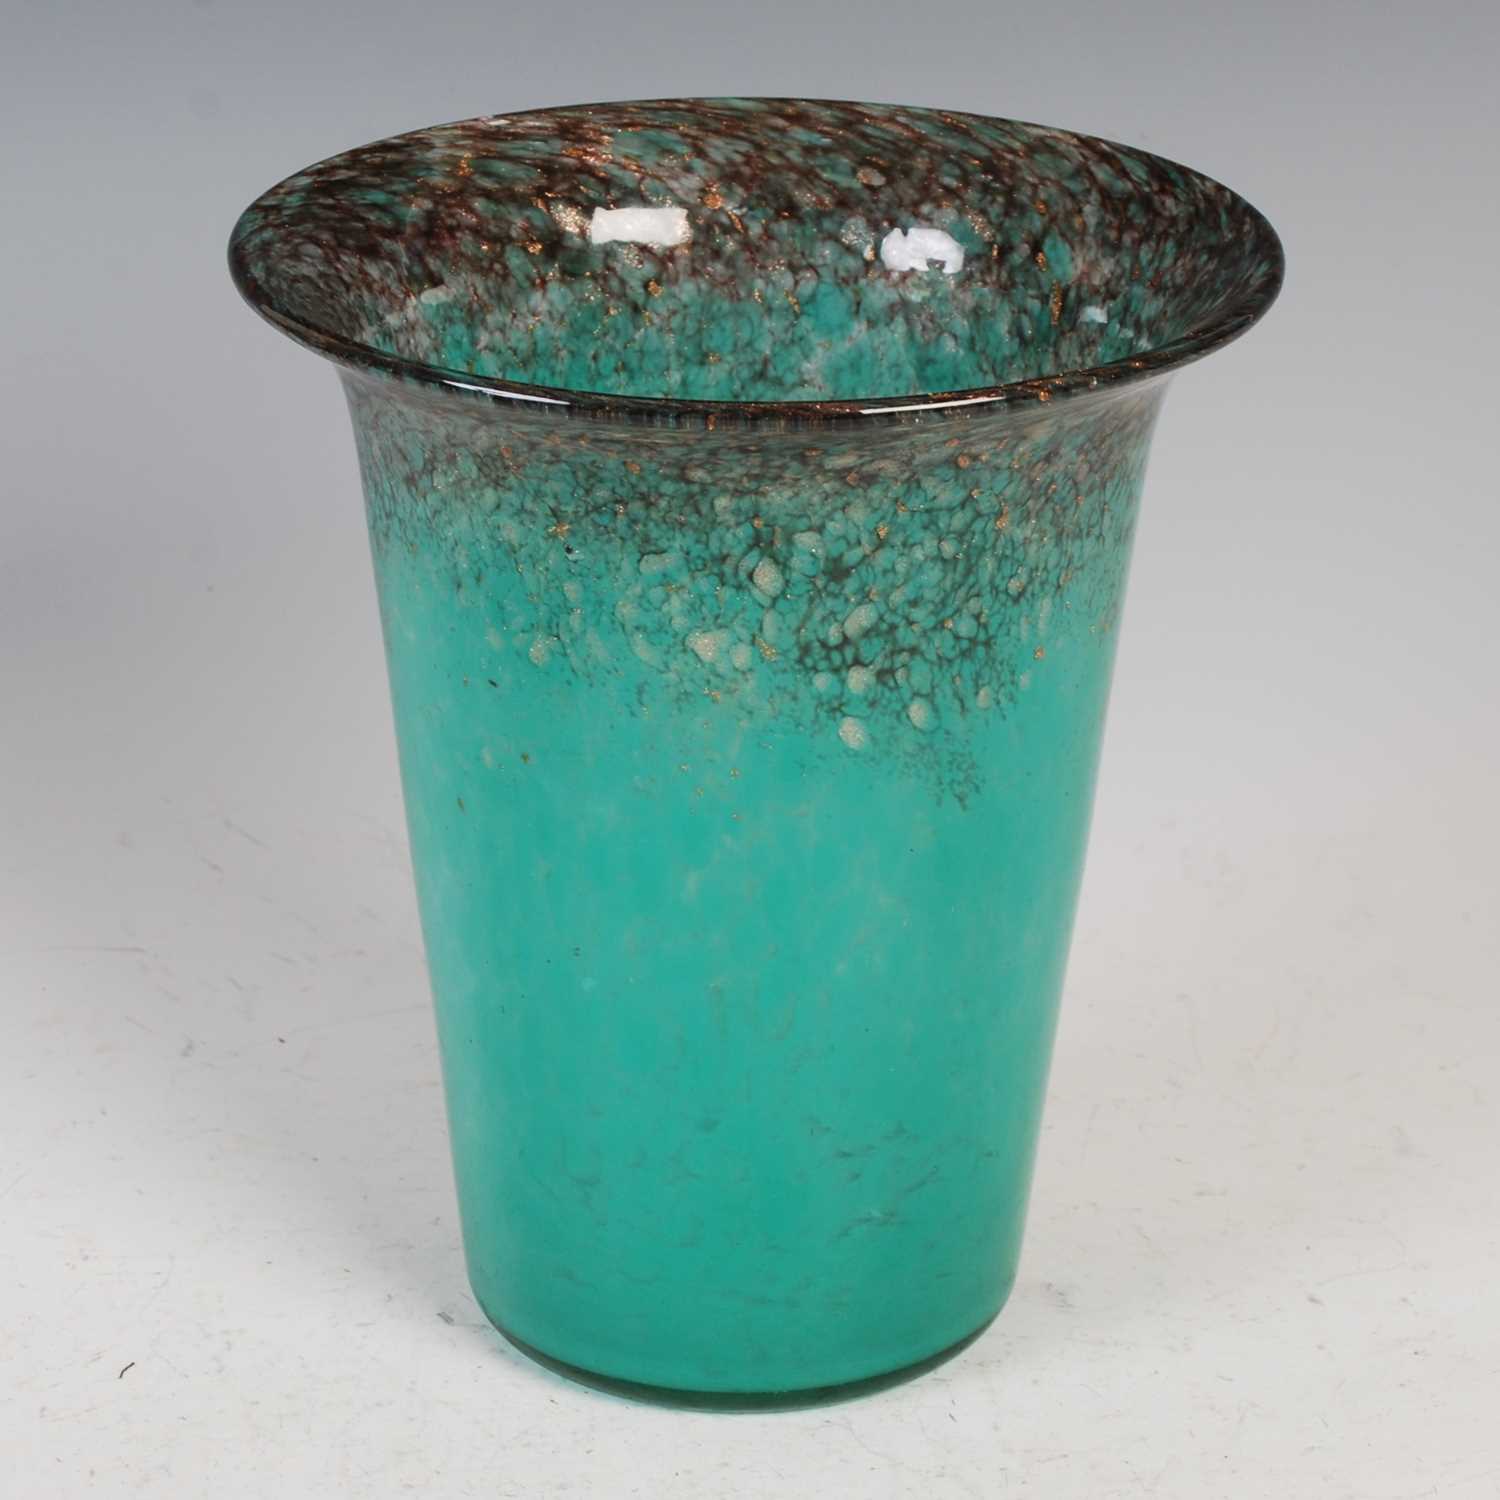 A Monart vase, probably shape PG, mottled black and green with gold-coloured inclusions, 19.5cm